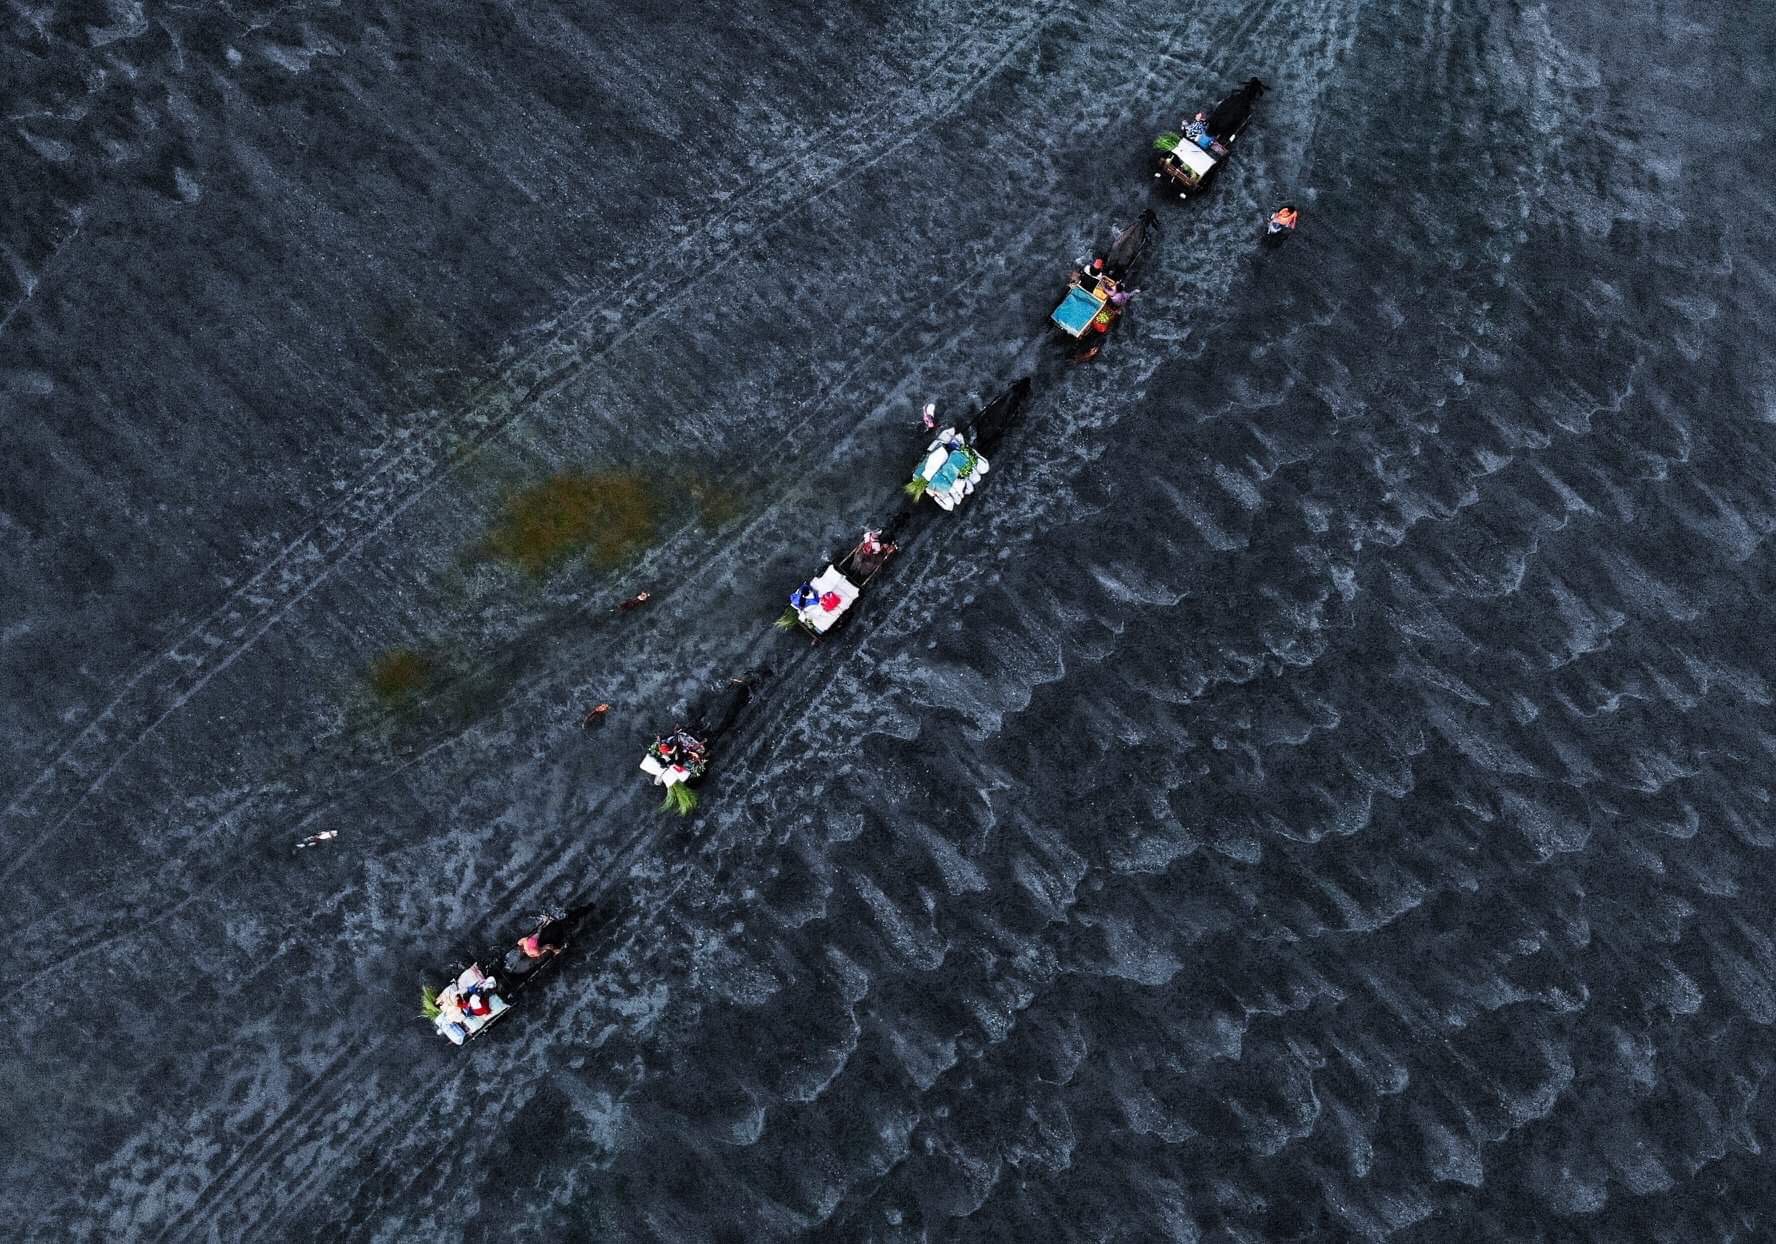 The view from above of people travel inline to cross the river of Botolan Zambales in the Philippines.